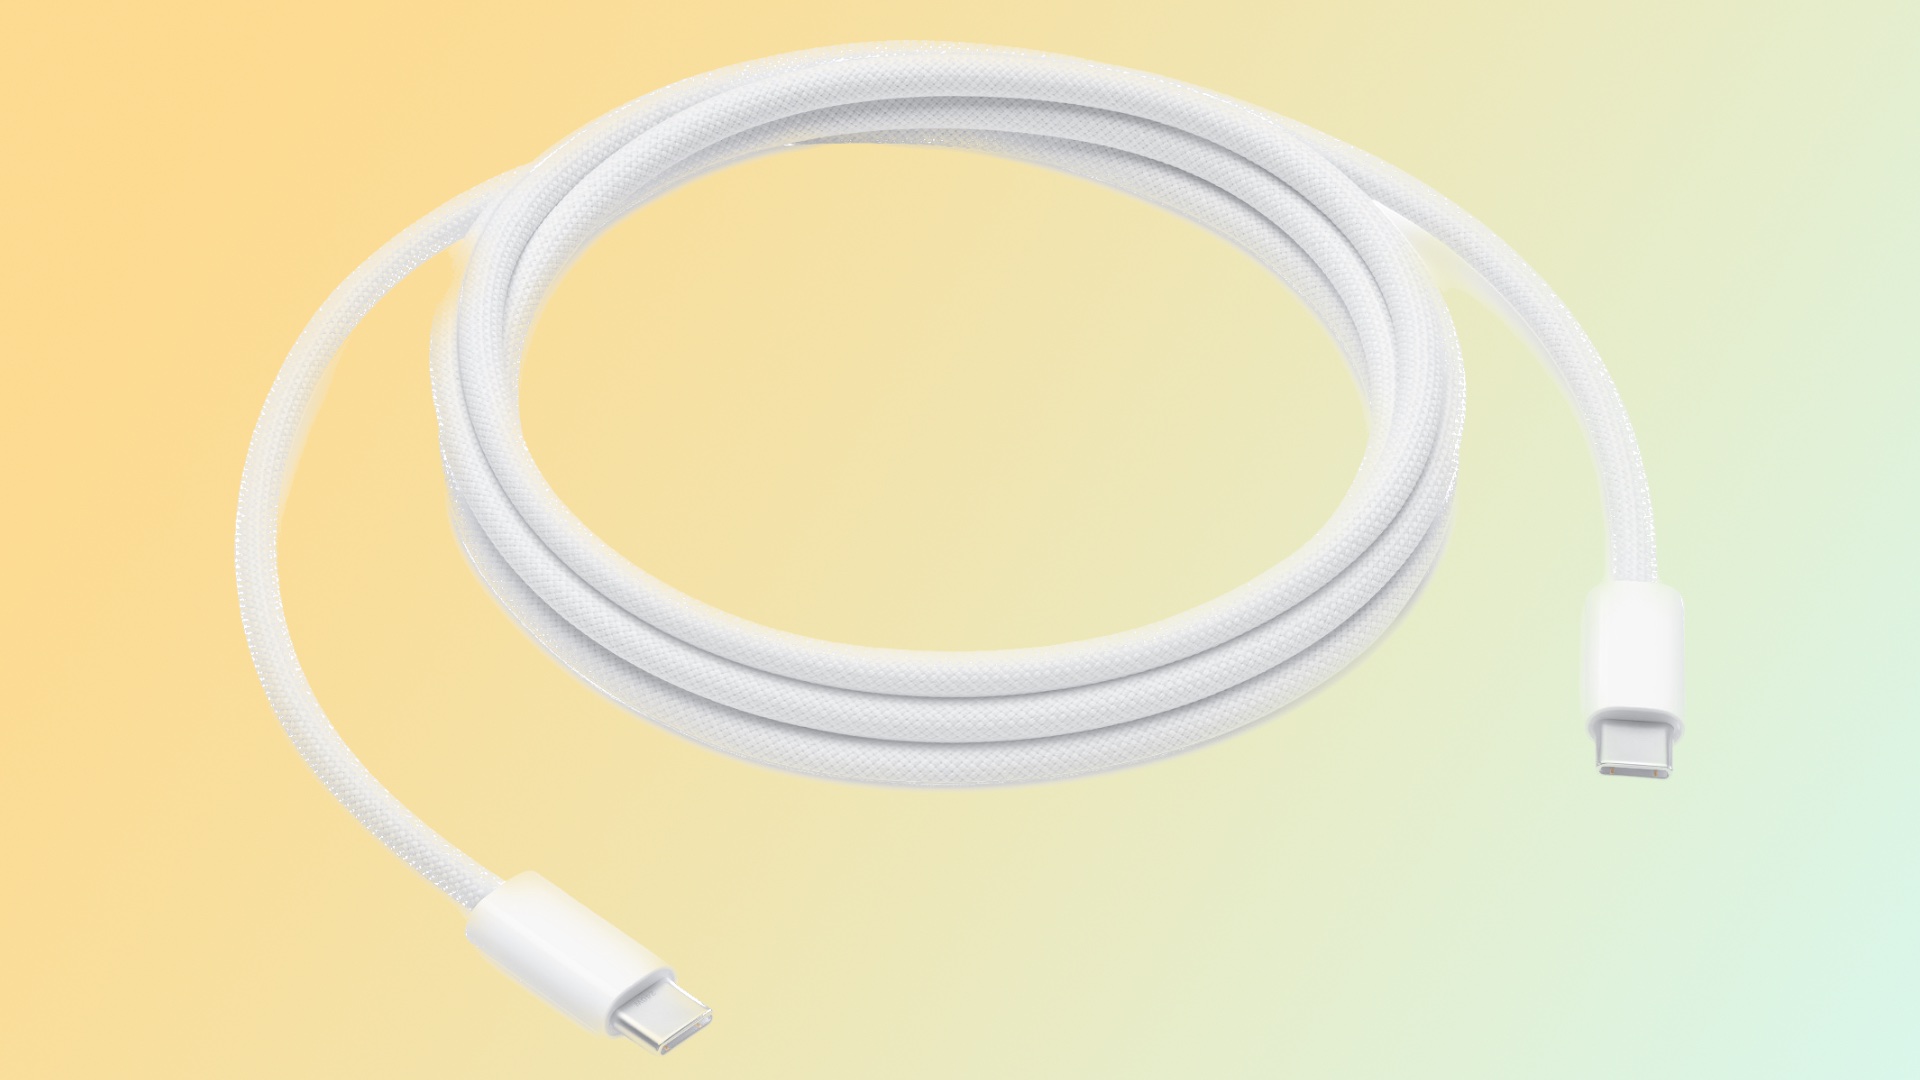 Apple launches two new woven USB-C charging cables in 1 and 2